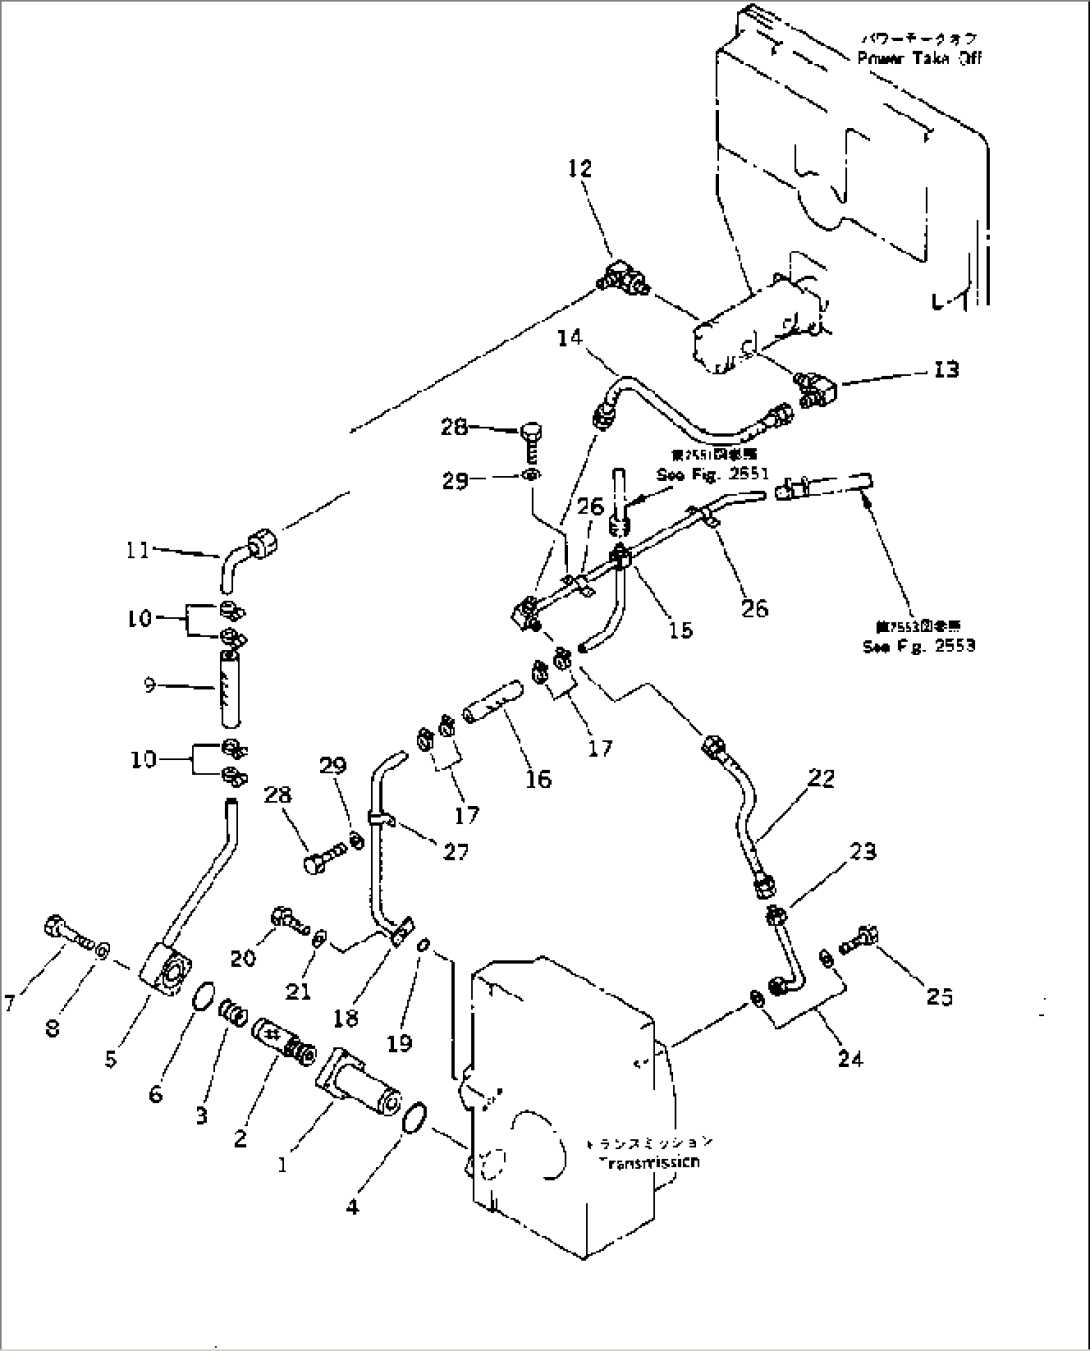 LUBRICATION PIPING (TRANSMISSION)(#10009-)